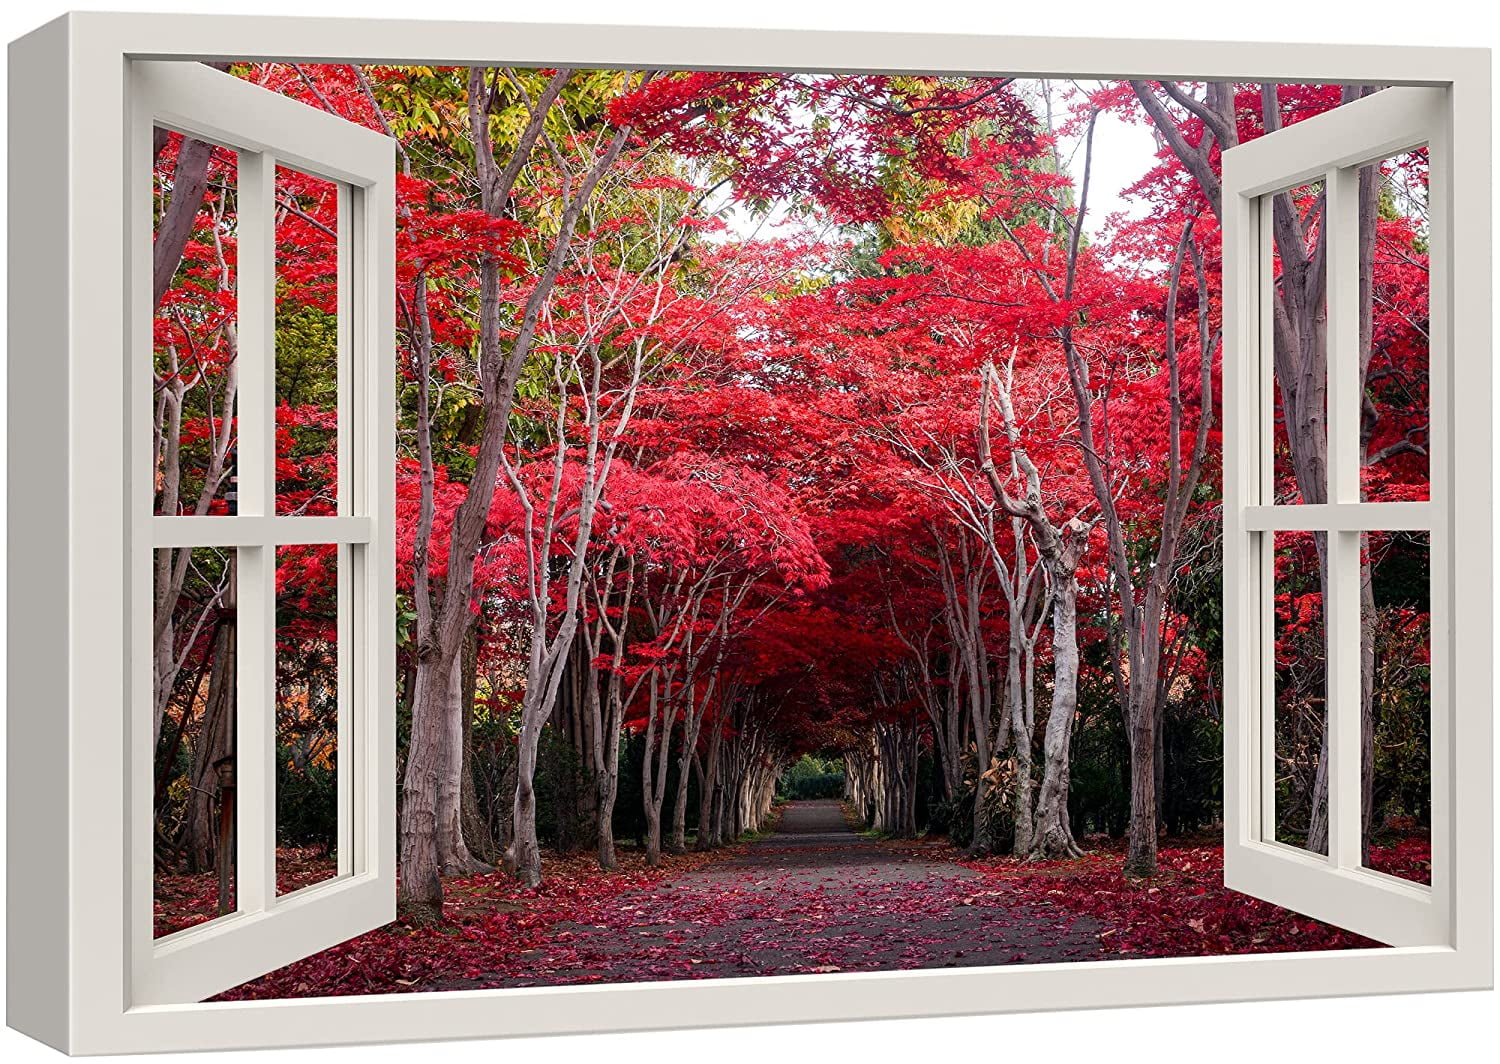 Forest Red Rustic Whitewashed Window View 24x36 Premium Canvas Gallery Wrap